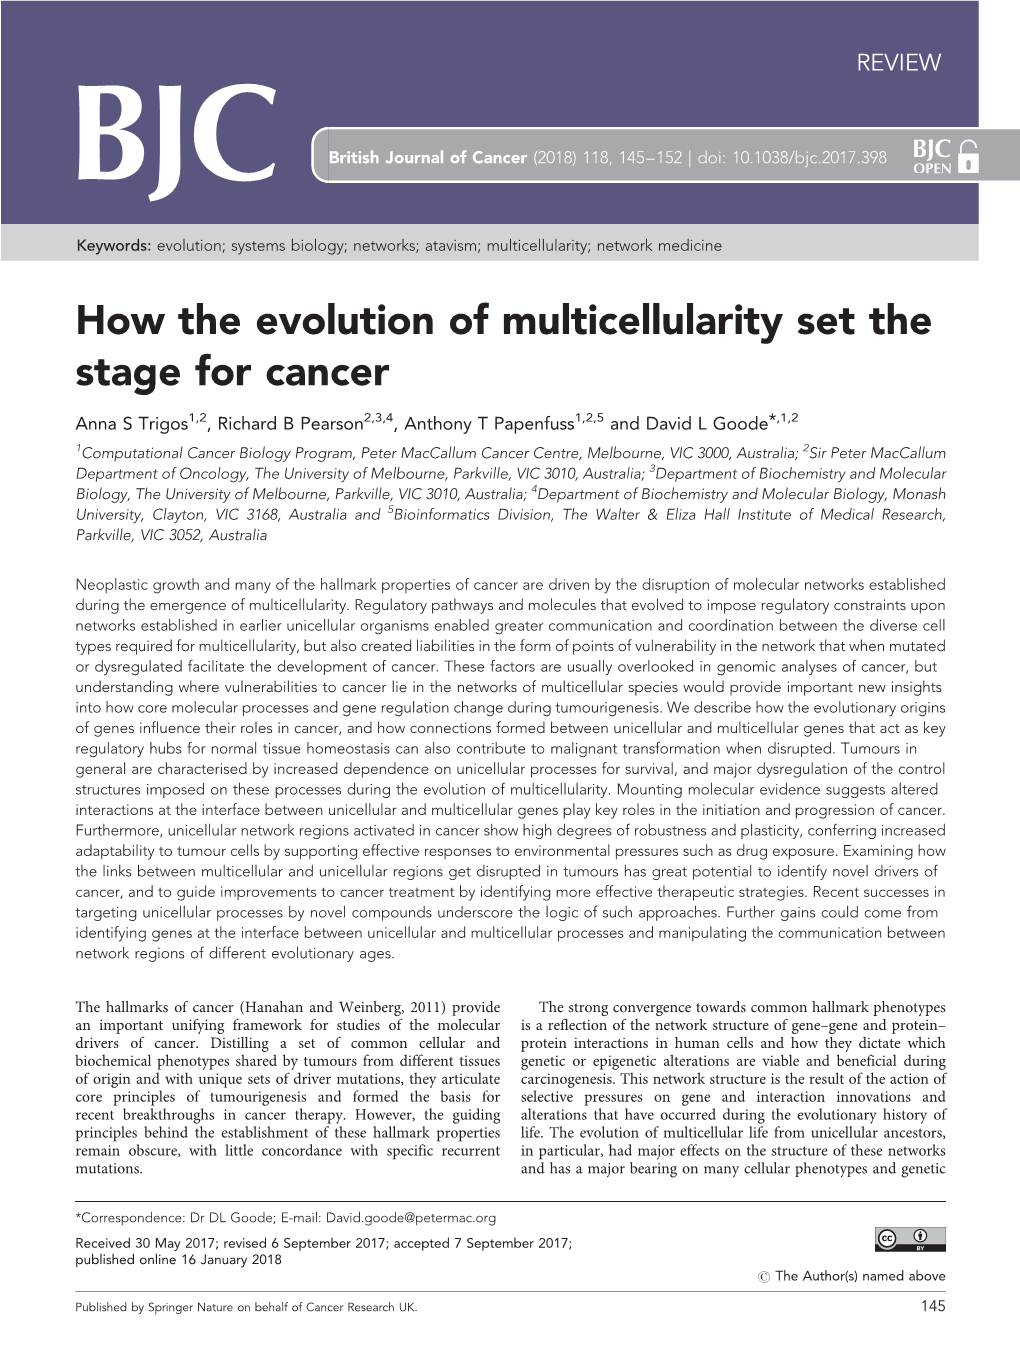 How the Evolution of Multicellularity Set the Stage for Cancer